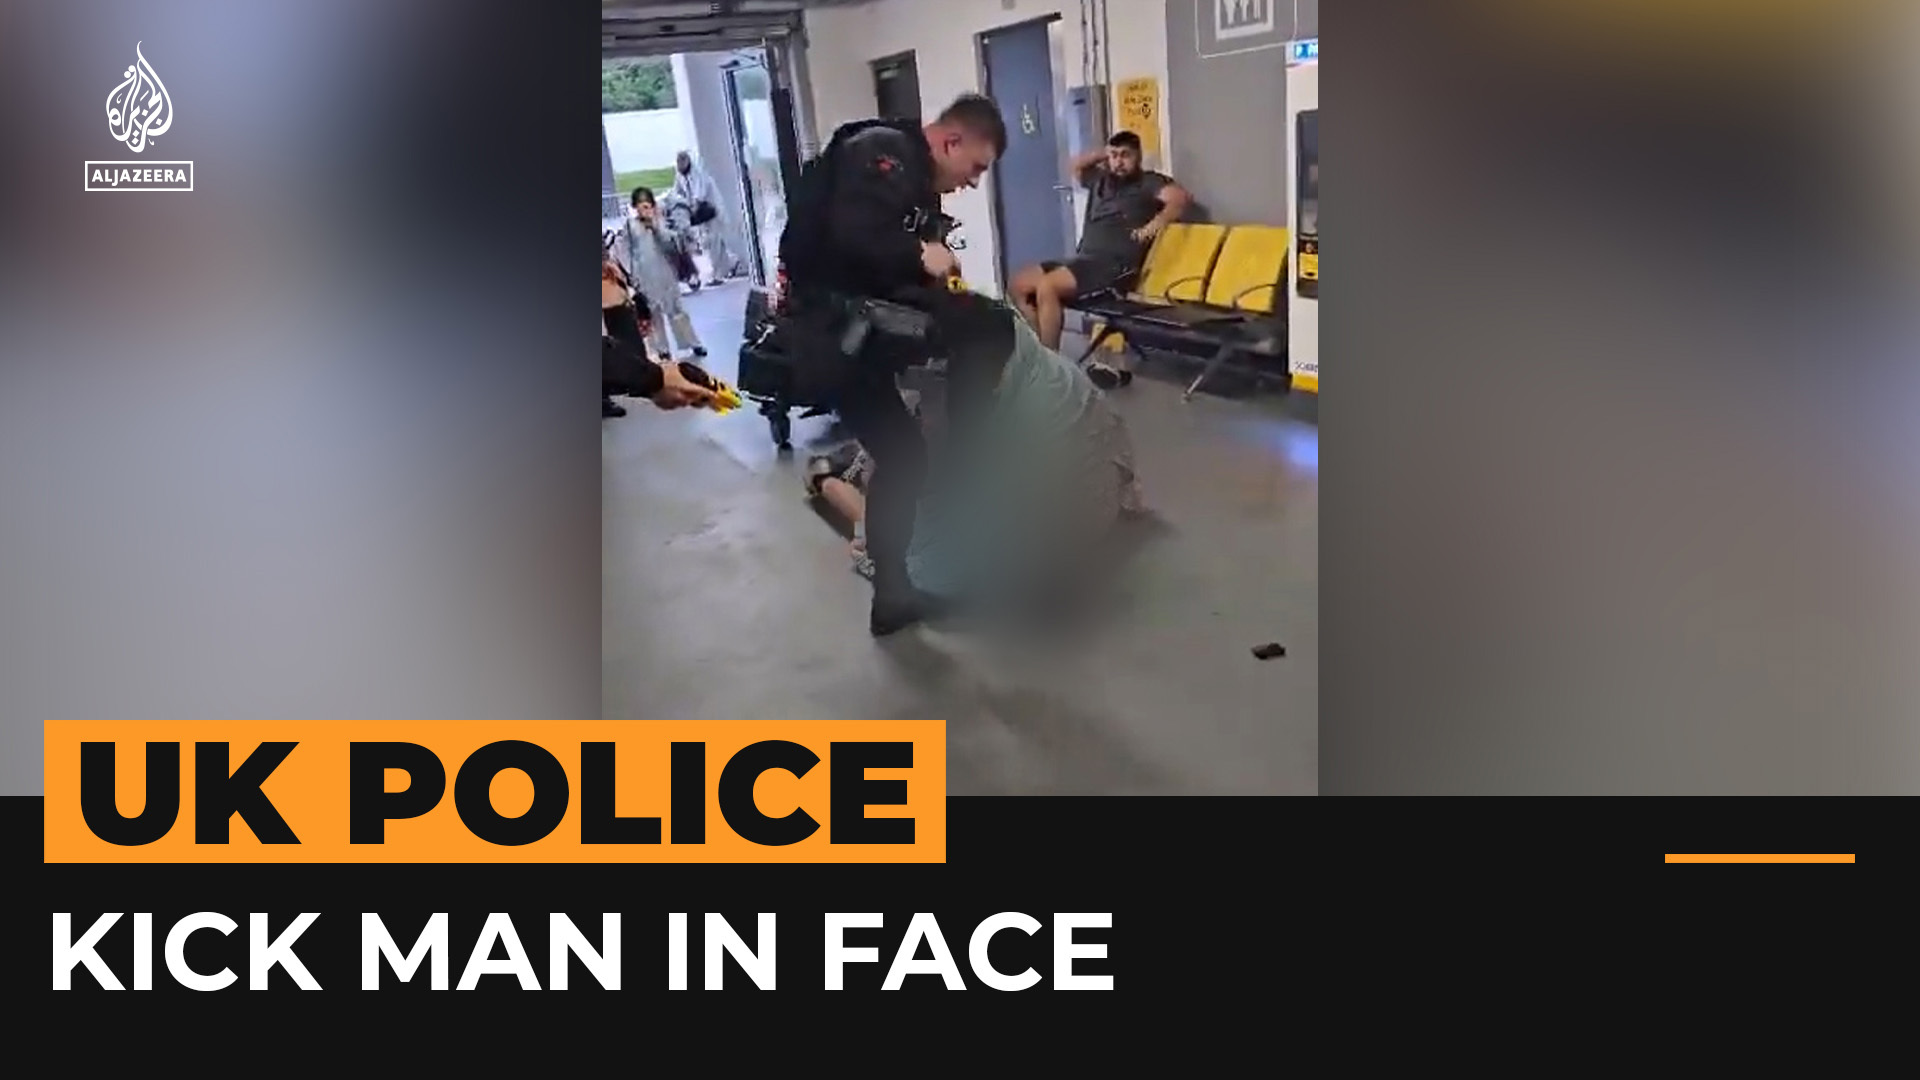 Outrage after British police officer filmed kicking man in the head | Police News [Video]